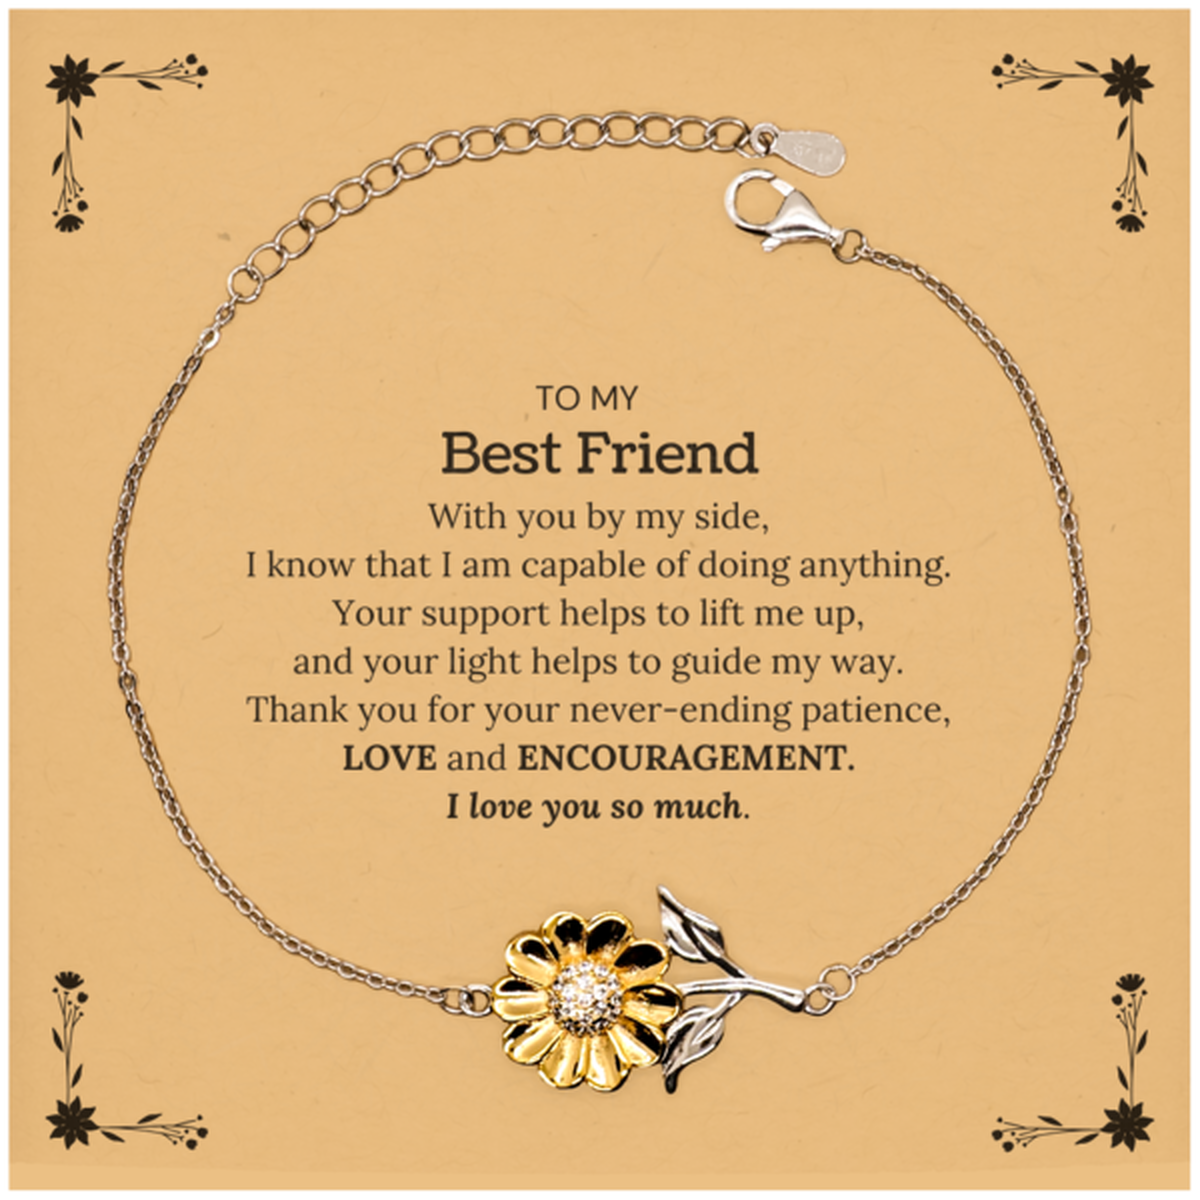 Appreciation Best Friend Sunflower Bracelet Gifts, To My Best Friend Birthday Christmas Wedding Keepsake Gifts for Best Friend With you by my side, I know that I am capable of doing anything. I love you so much